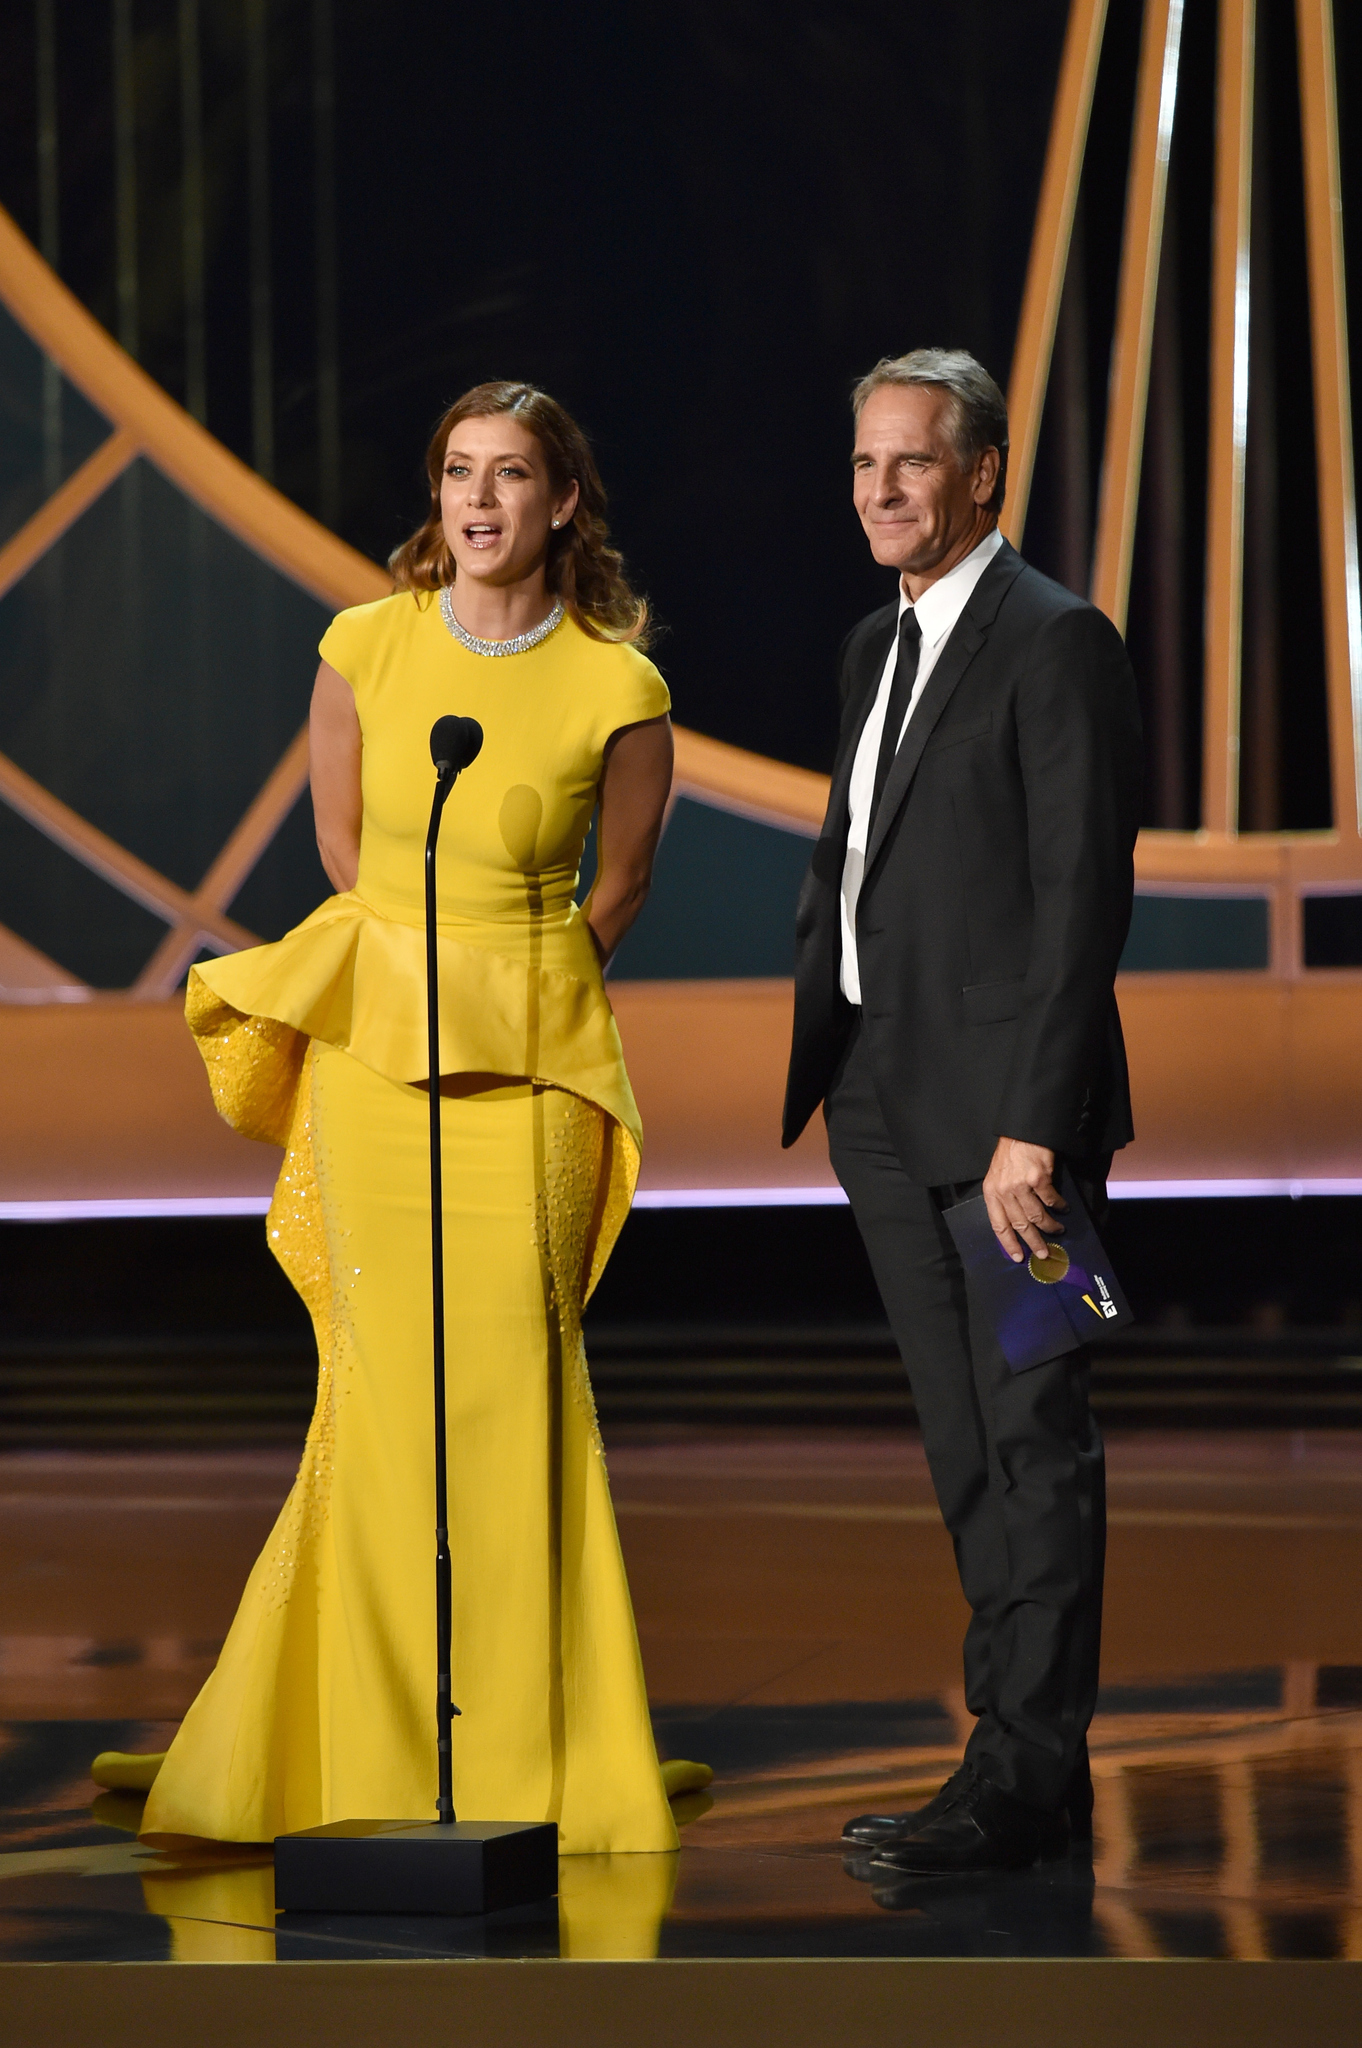 Scott Bakula and Kate Walsh at event of The 66th Primetime Emmy Awards (2014)